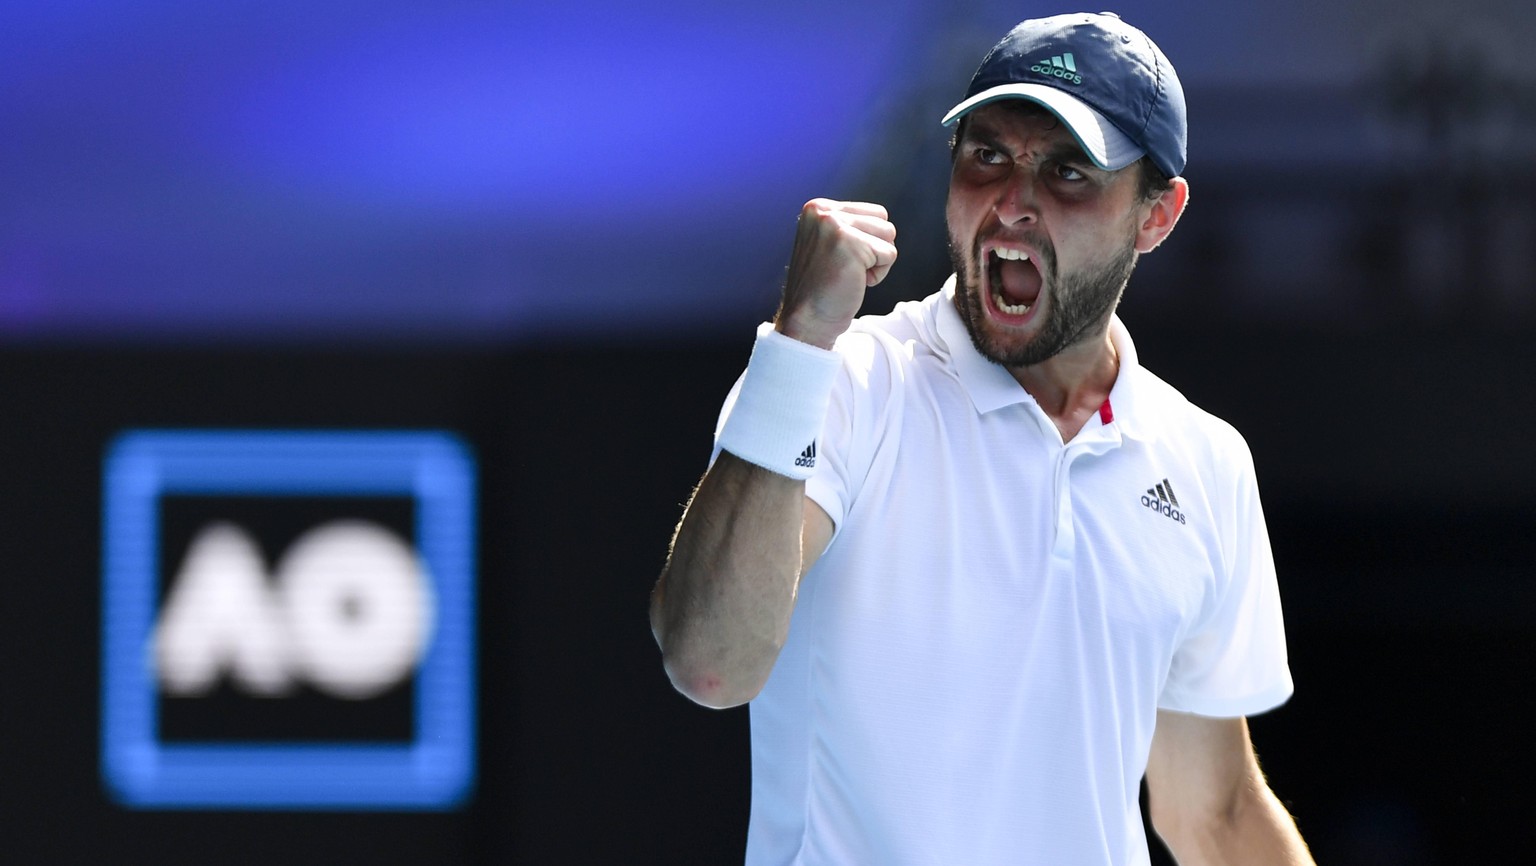 TENNIS AUSTRALIAN OPEN, Aslan Karatsev of Russia reacts during his Quarterfinals Men s singles match against Grigor Dimitrov of Bulgaria on Day 9 of the Australian Open at Melbourne Park in Melbourne, ...